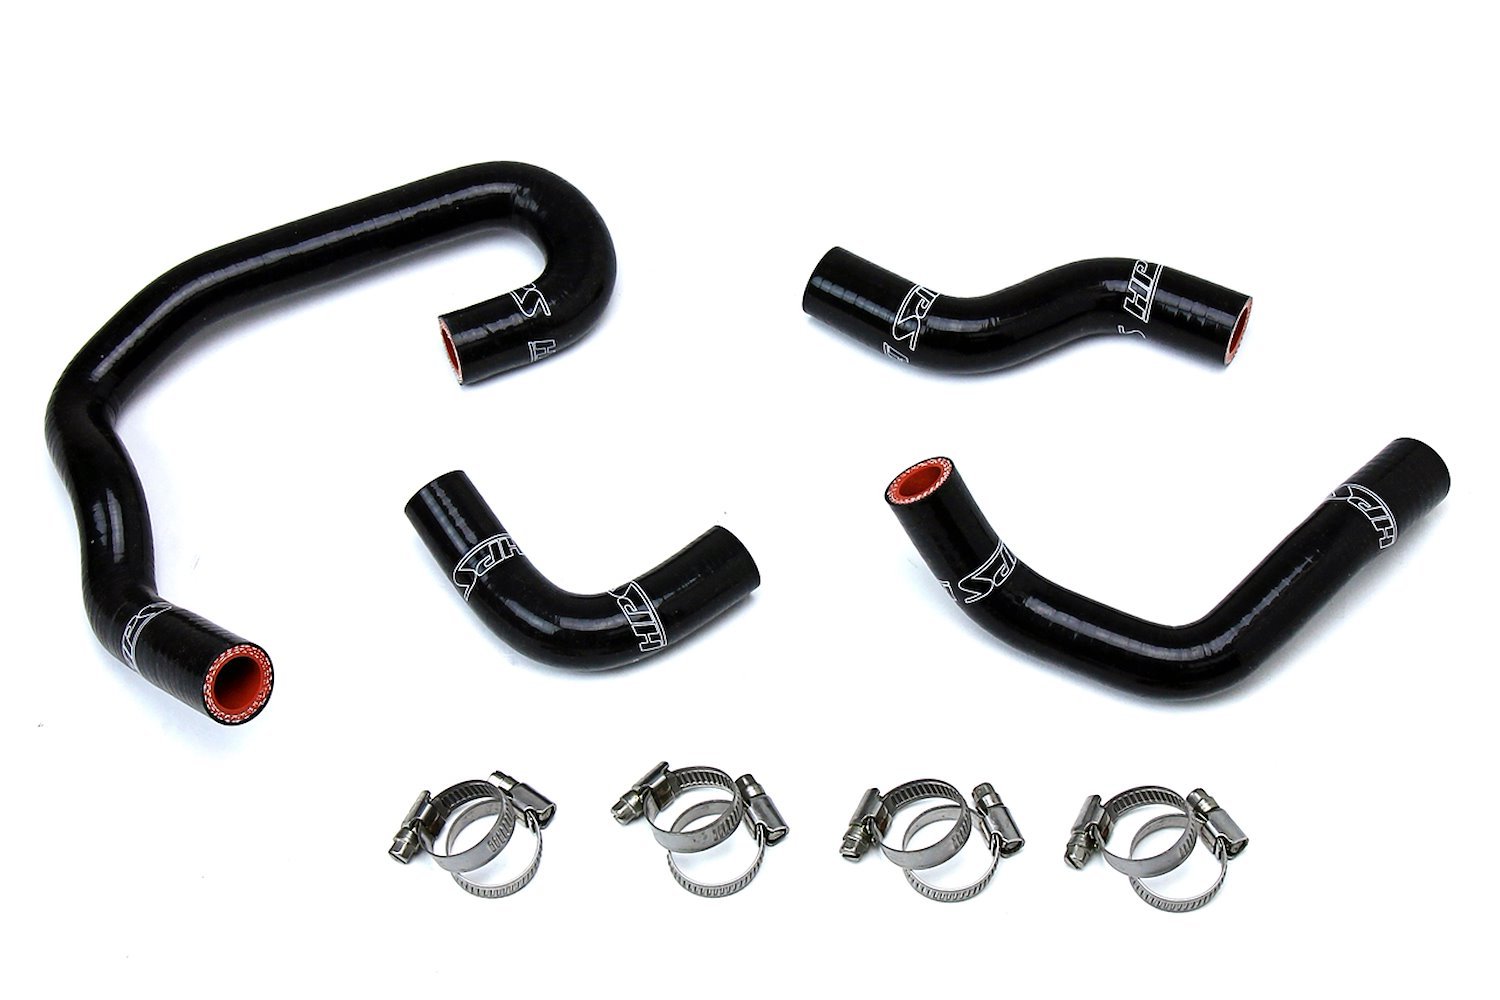 57-1323H-BLK Heater Hose Kit, High-Temp 3-Ply Reinforced Silicone, Replace OEM Rubber Heater Coolant Hoses